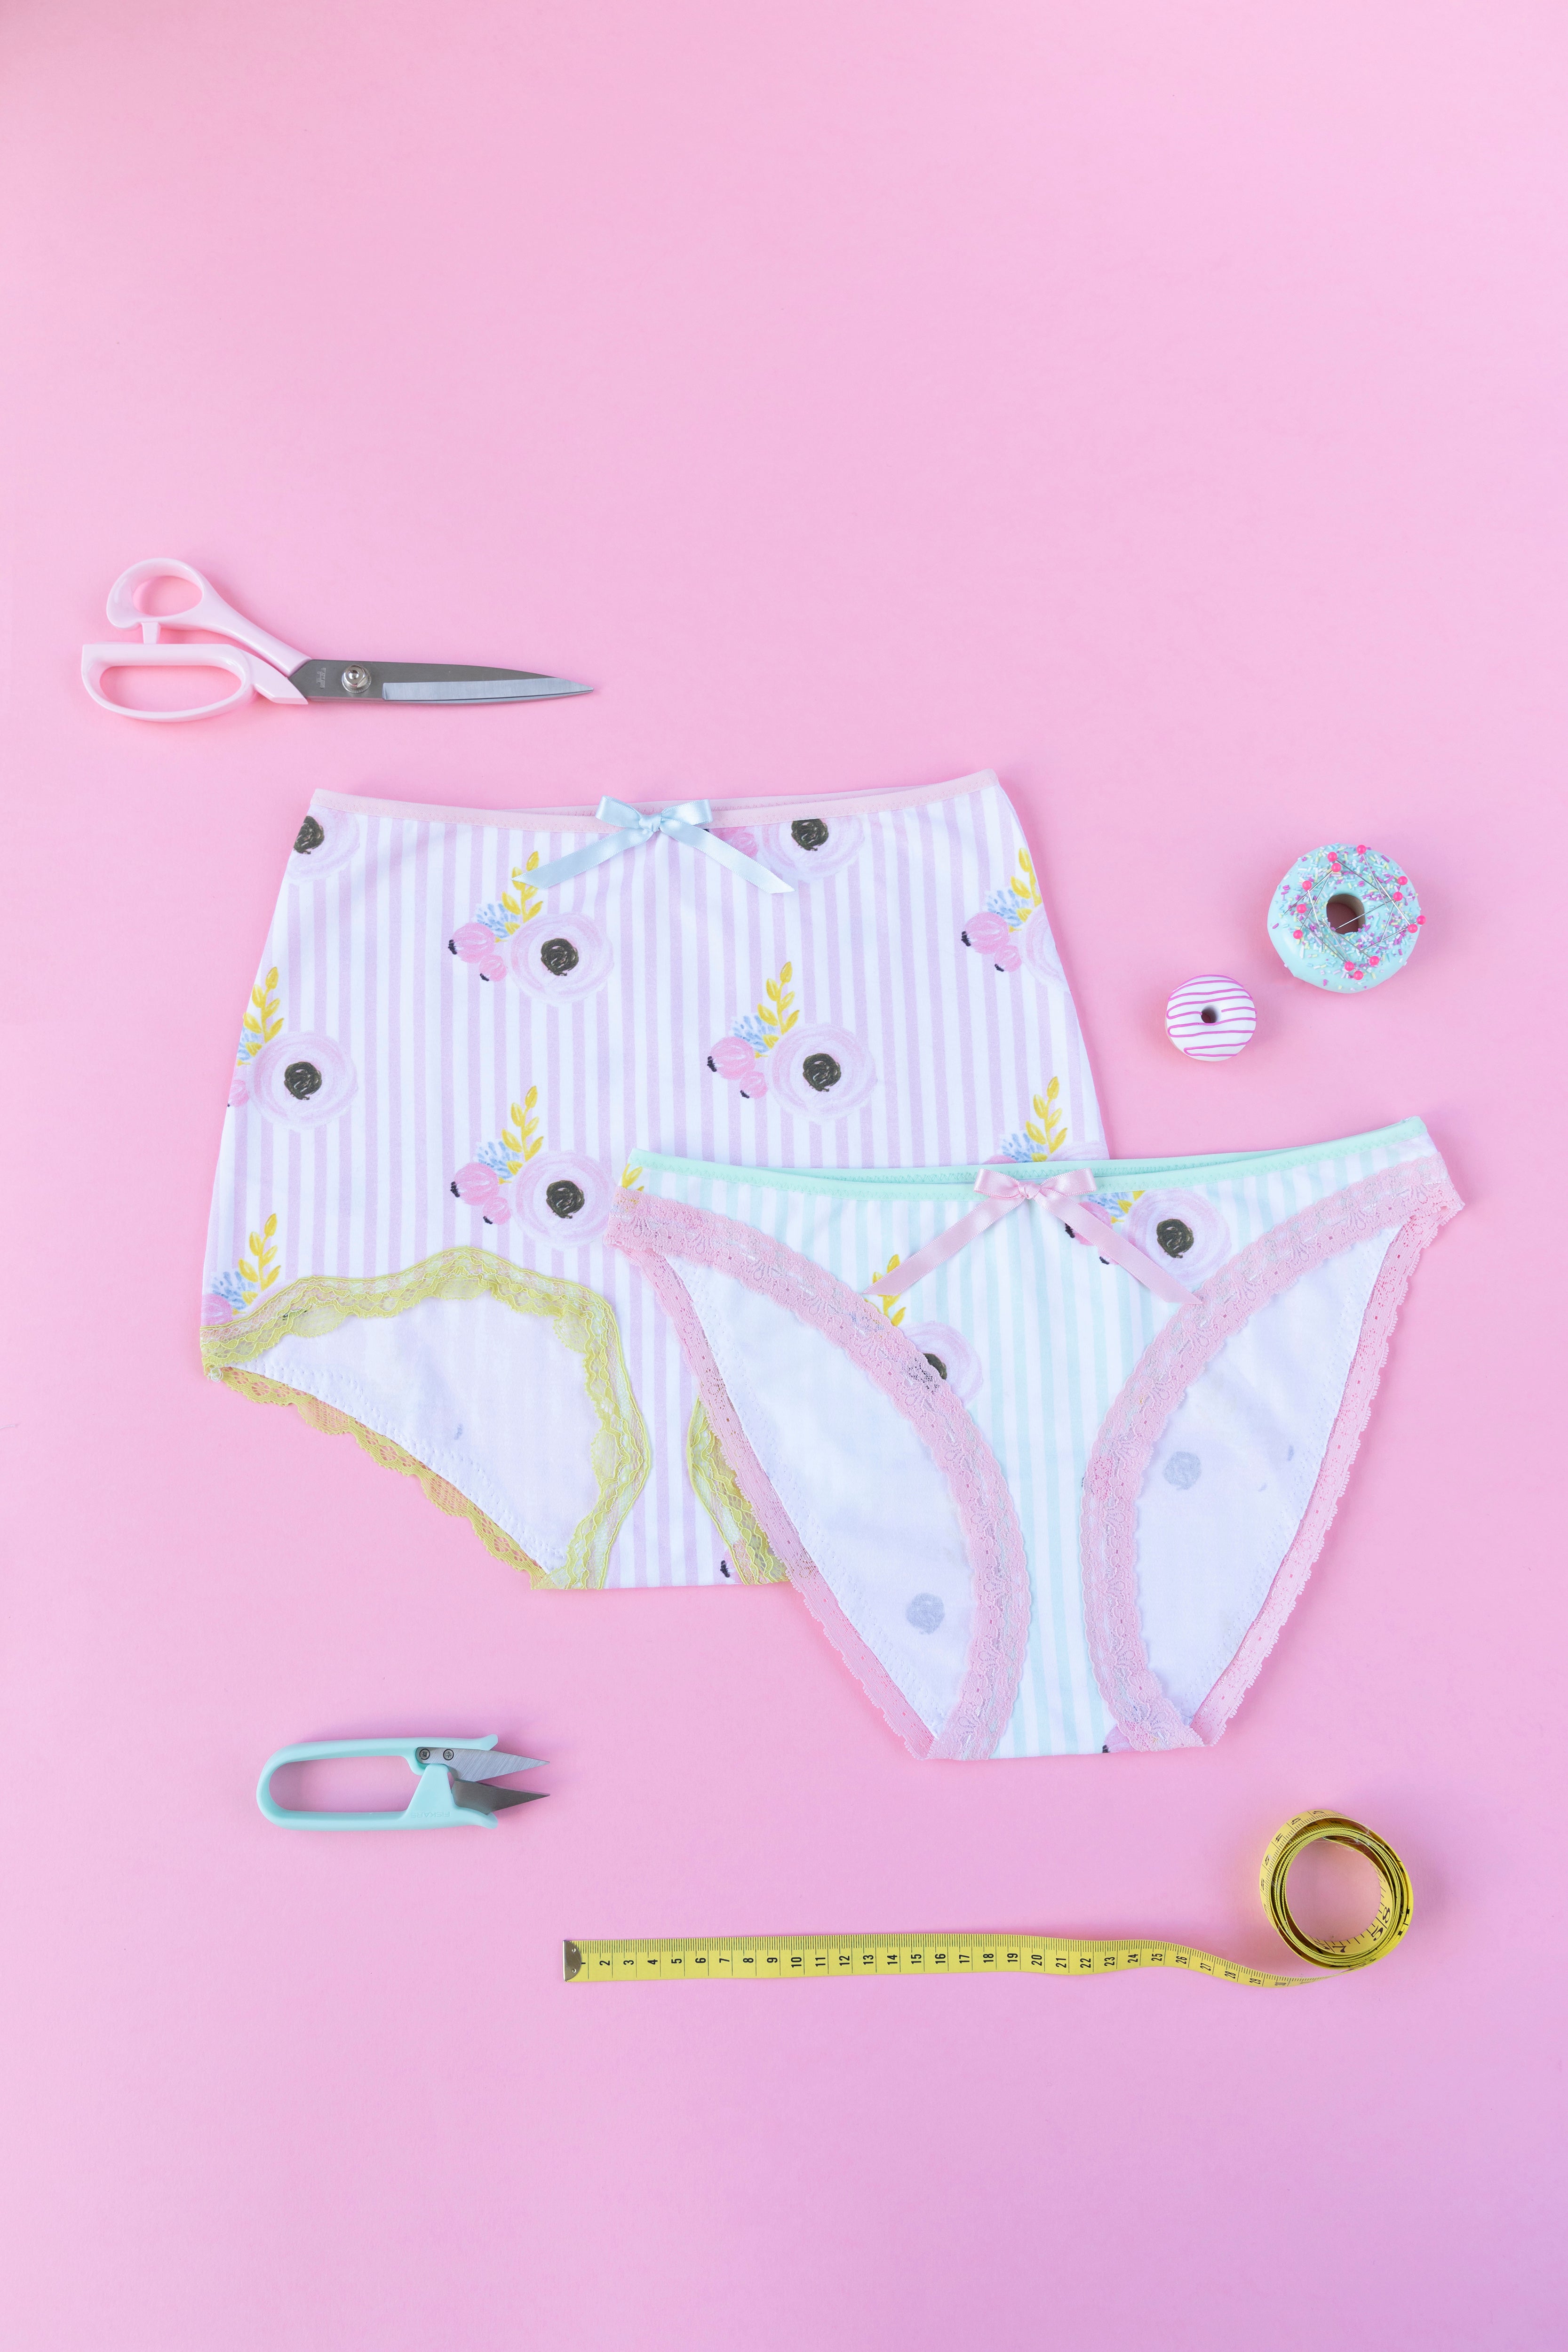 Tilly and the Buttons - Iris Knickers Sewing Pattern (6-24)